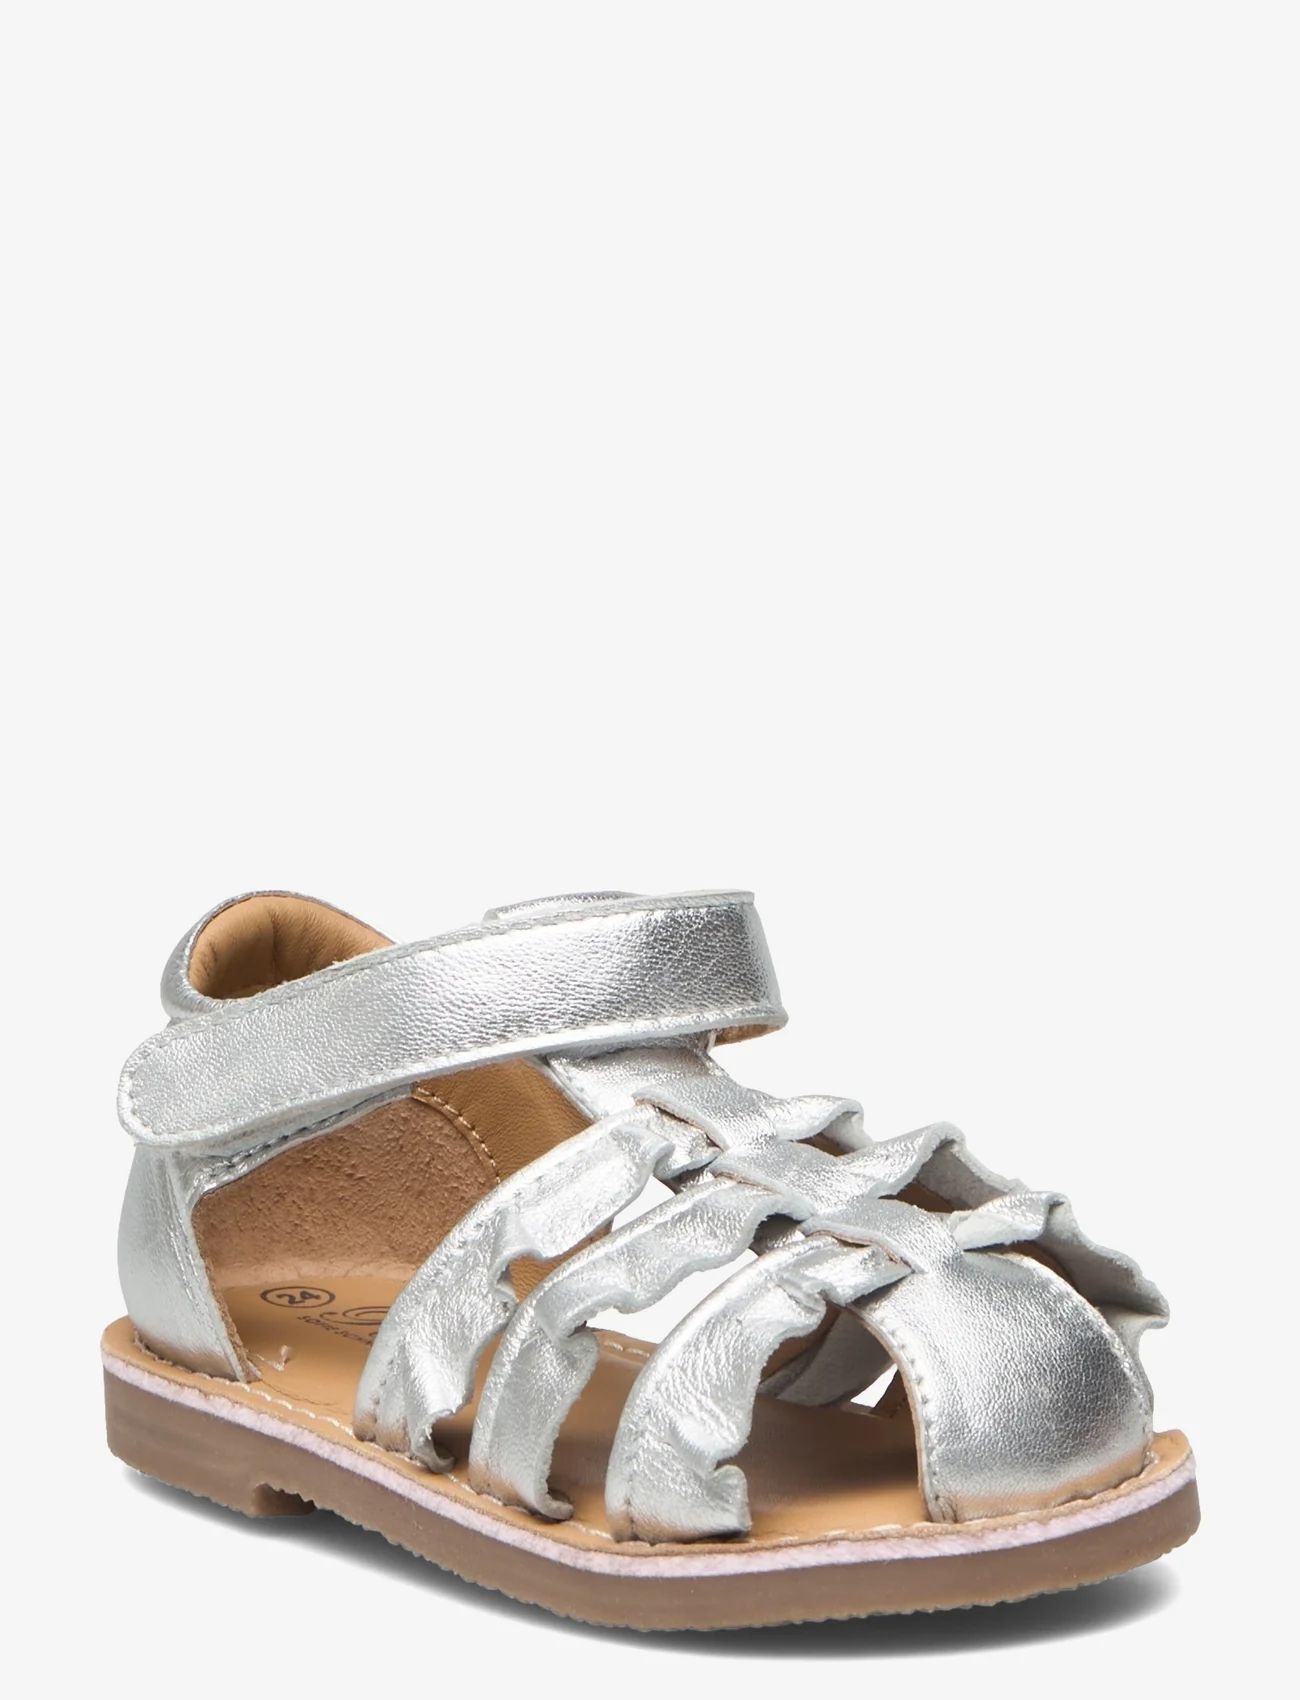 Sofie Schnoor Baby and Kids - Sandal - zomerkoopjes - silver - 0